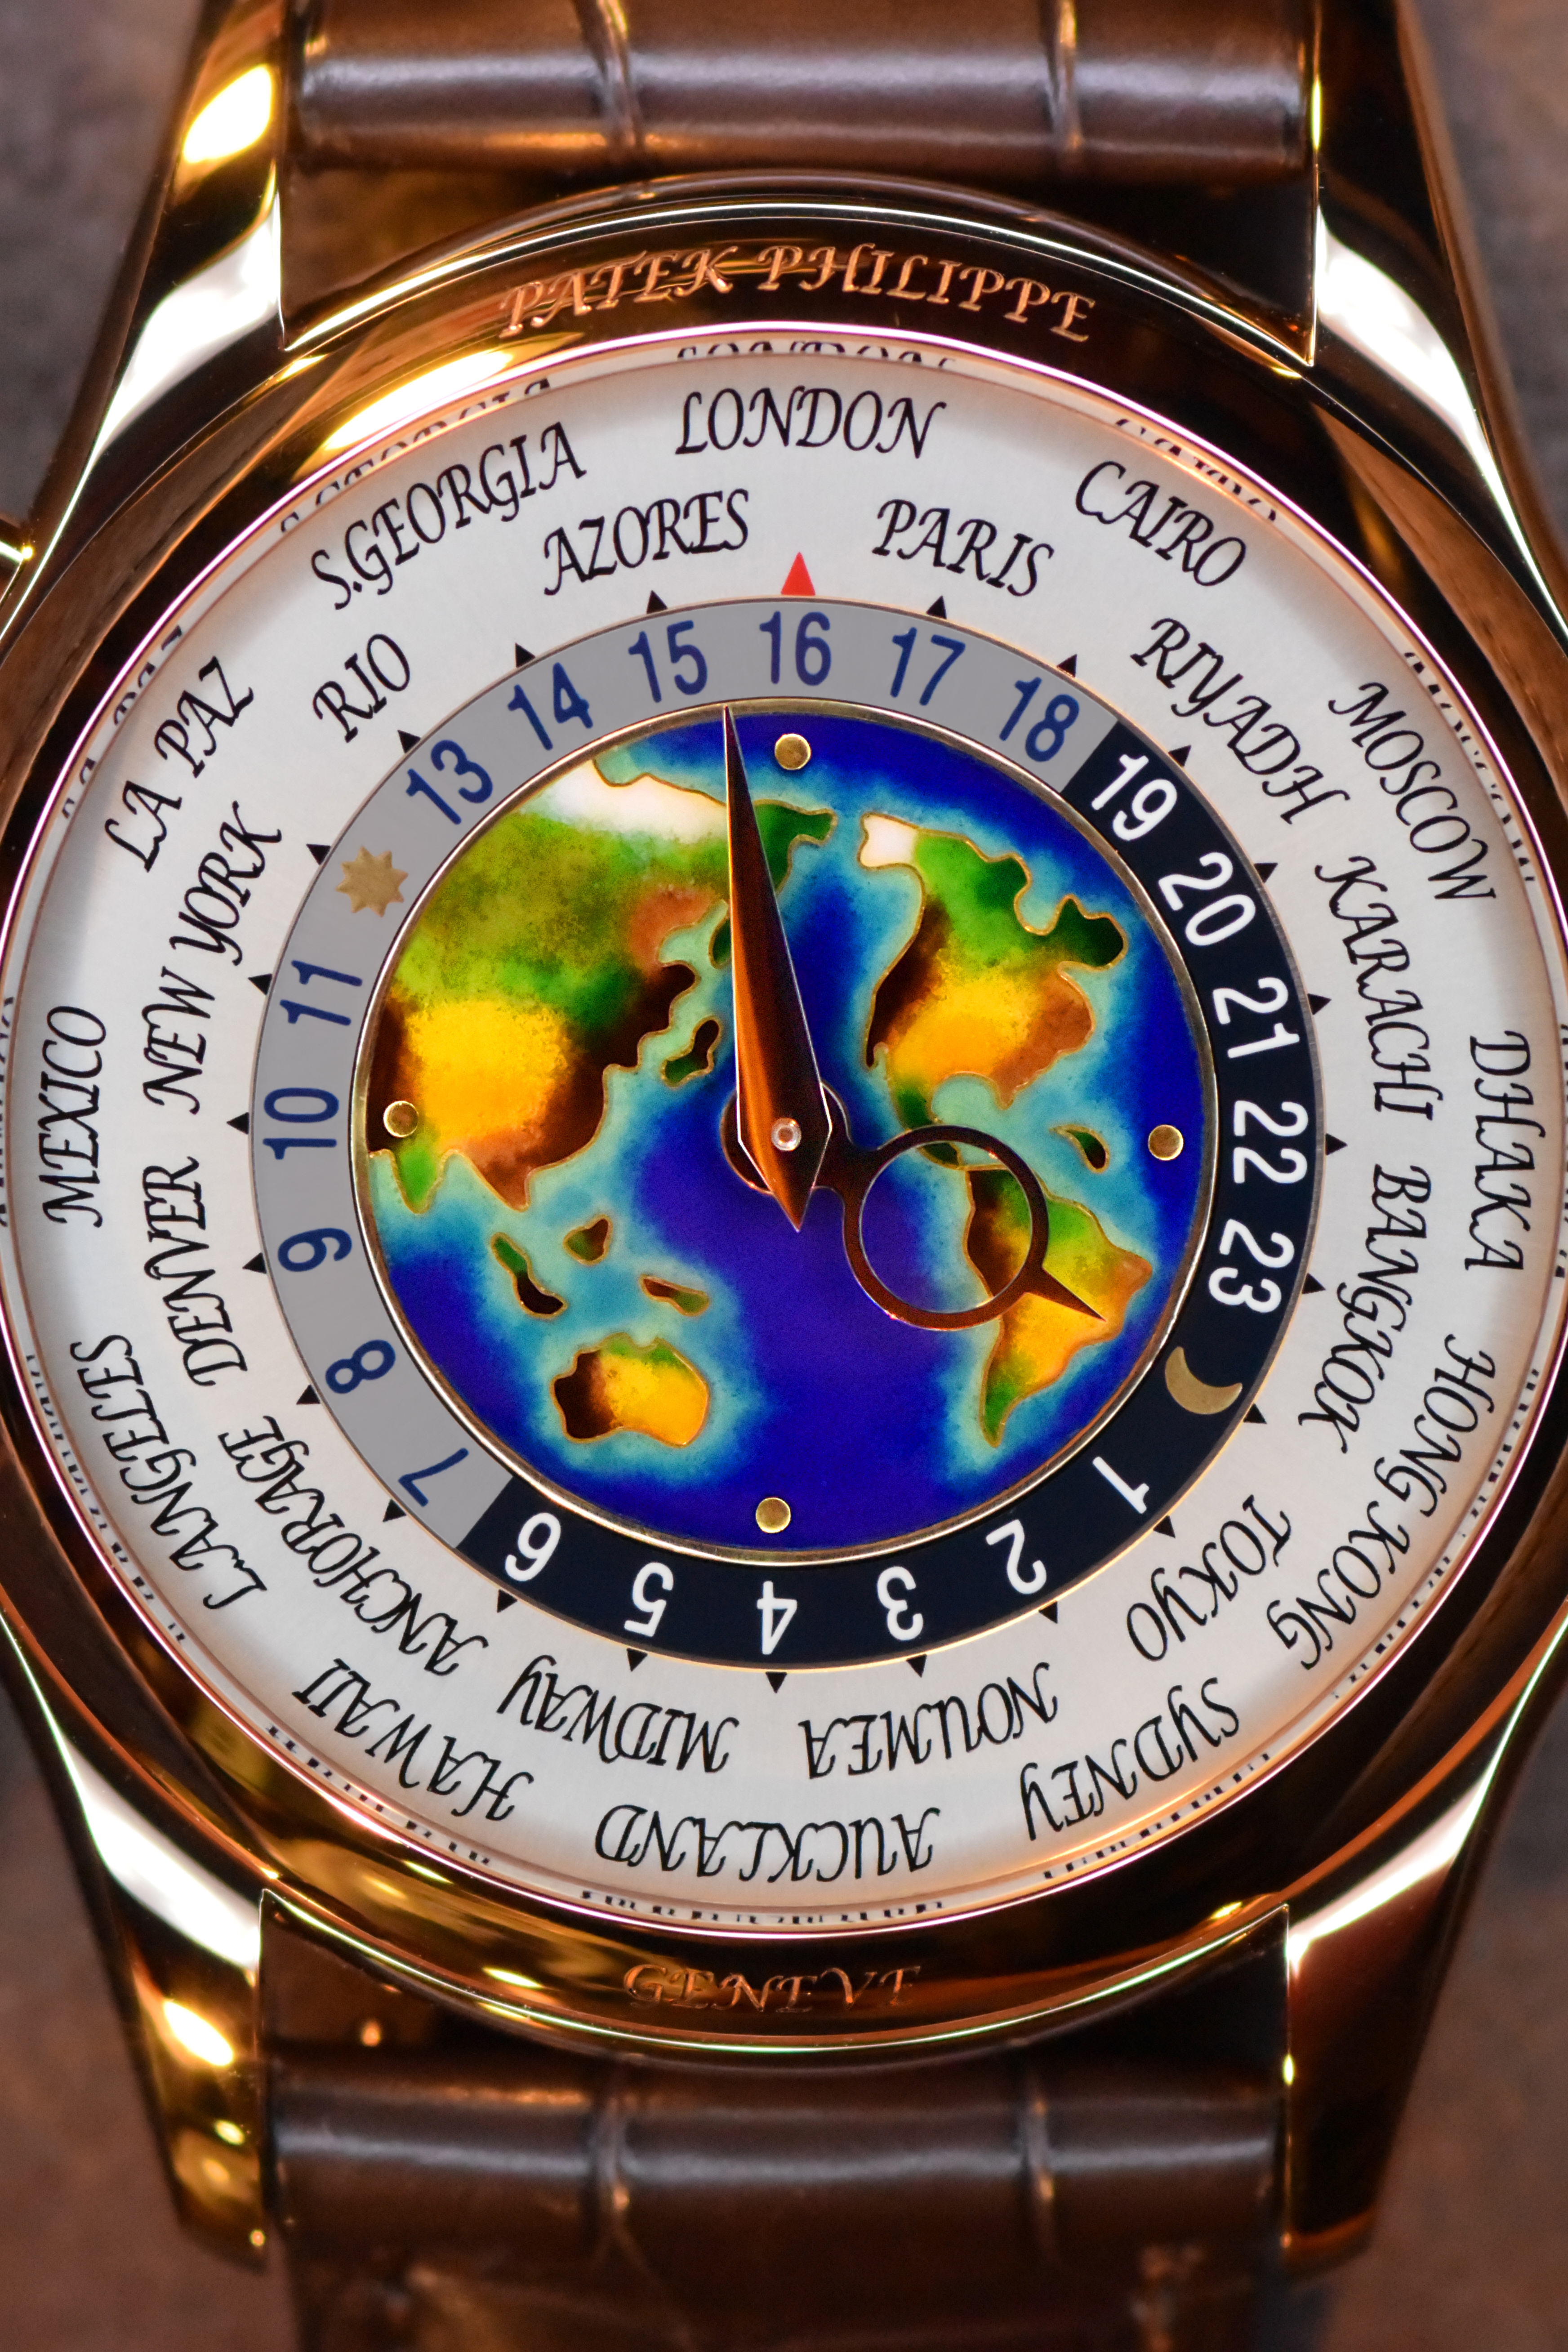 The Patek Philippe Legacy: Why Owning an Heirloom Piece is a Timeless Choice